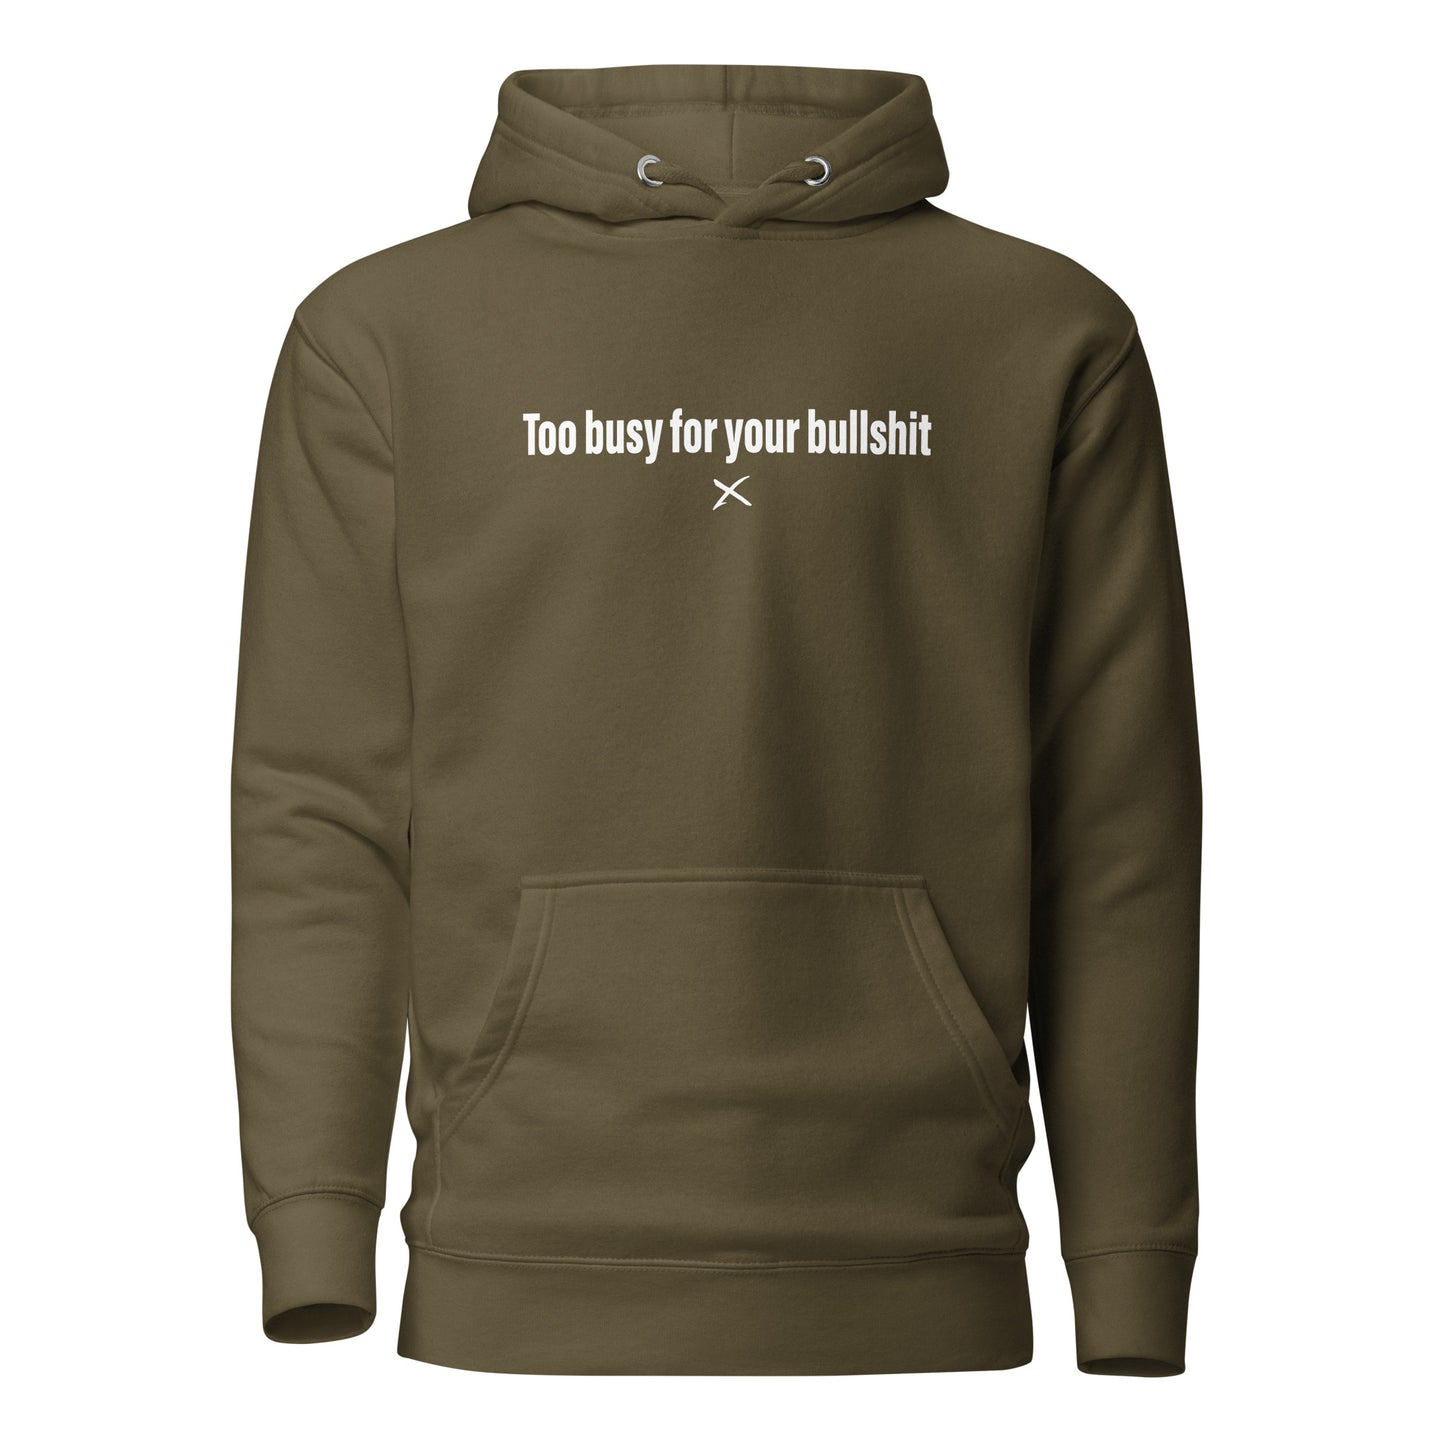 Too busy for your bullshit - Hoodie